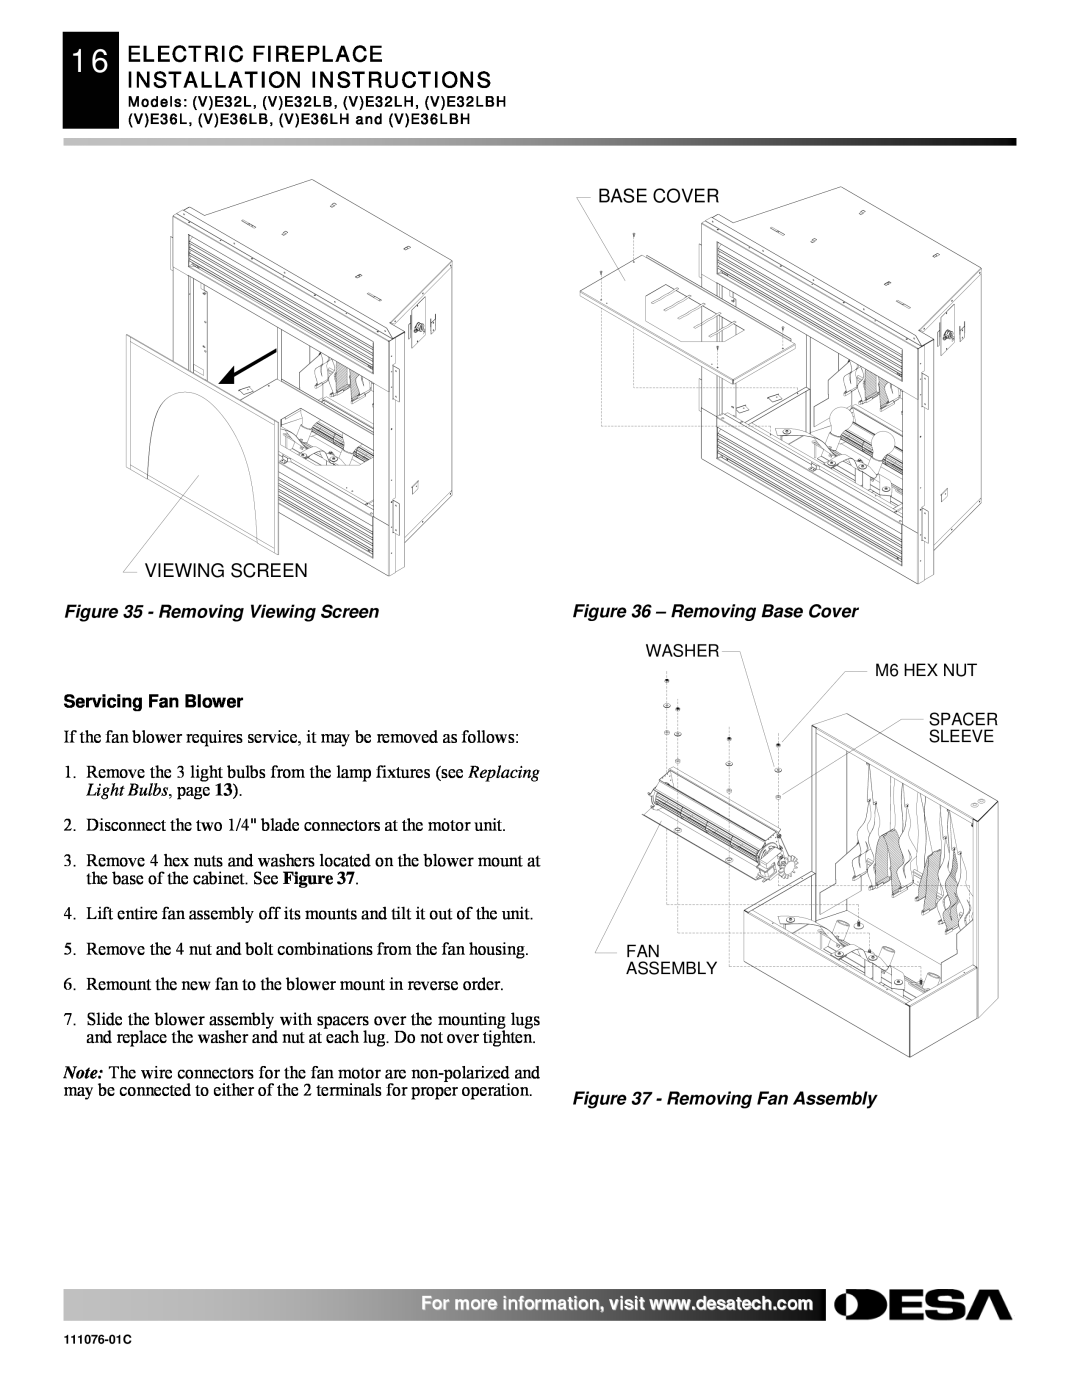 Desa E32, VE36, VE32 Electric Fireplace Installation Instructions, Removing Viewing Screen, Servicing Fan Blower 